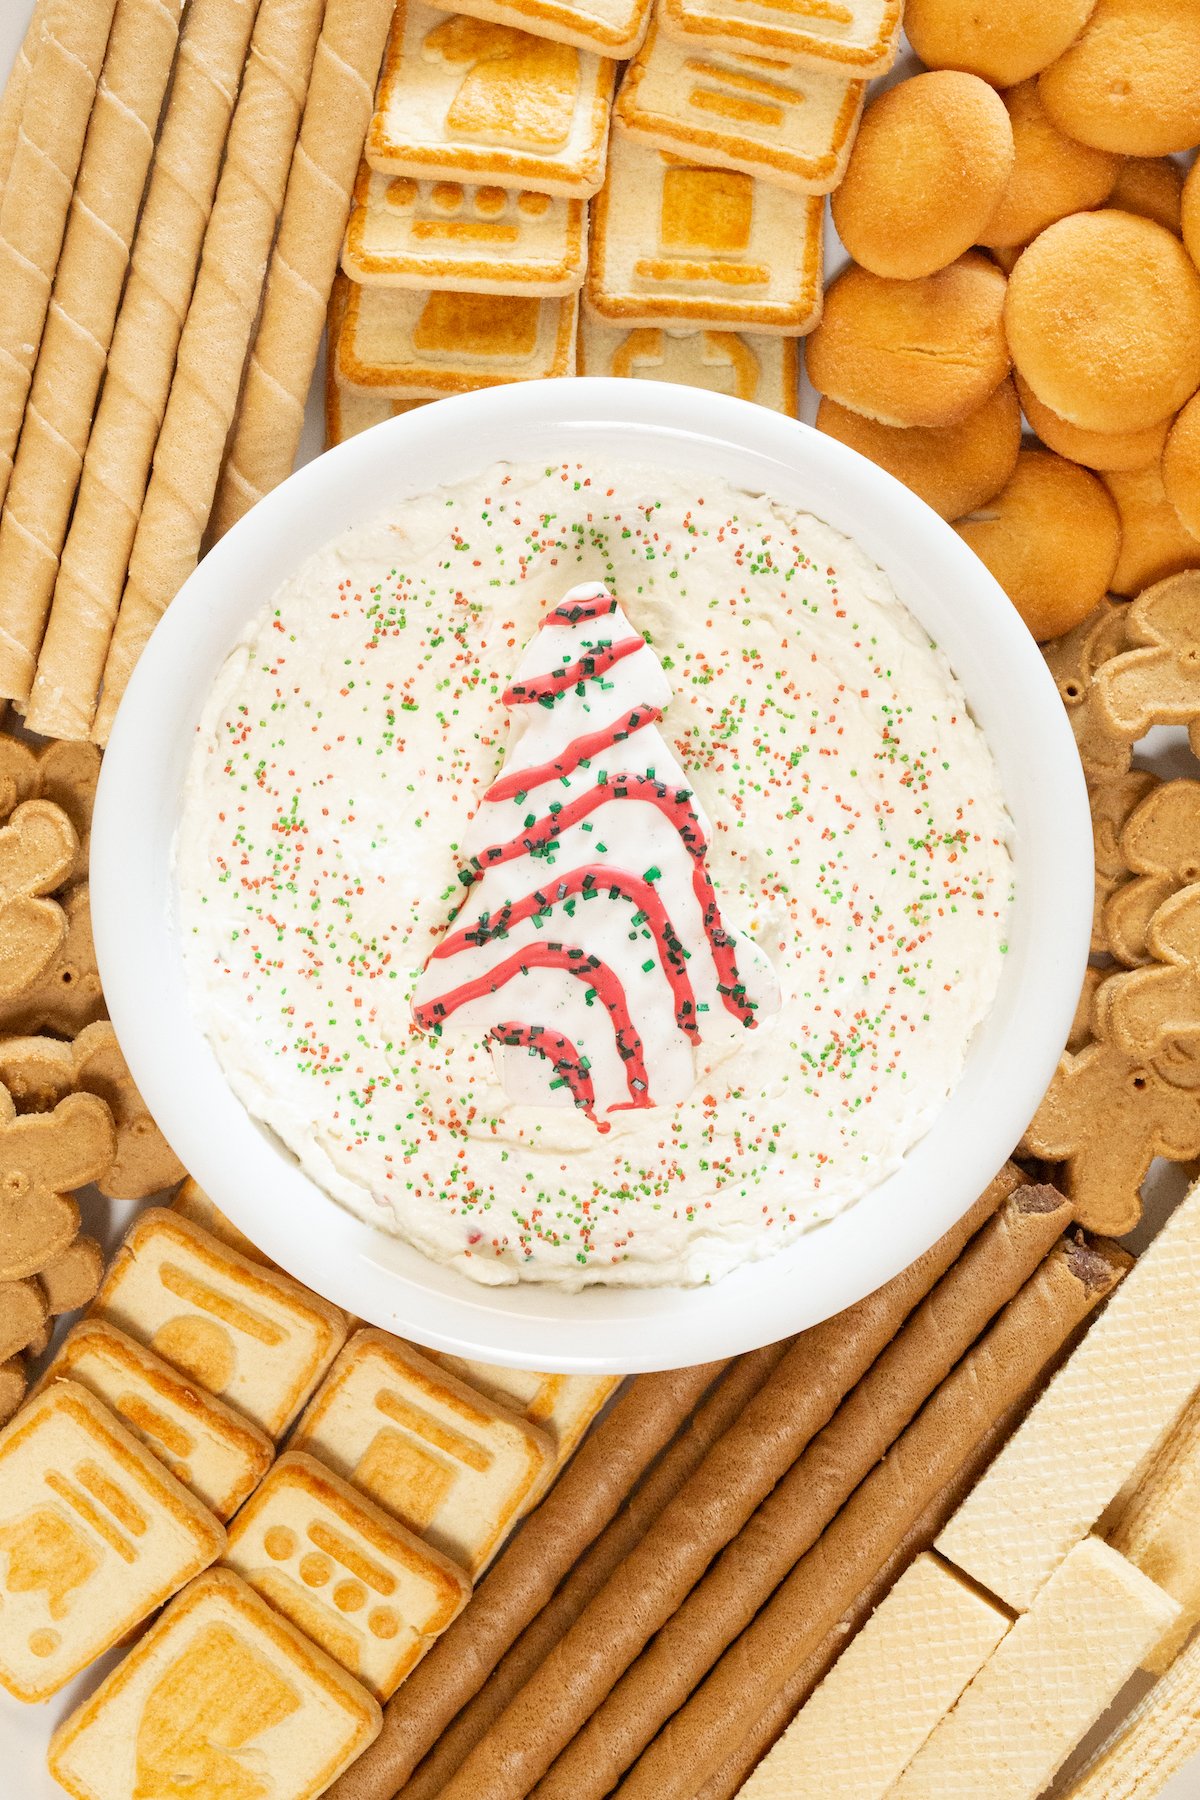 Overhead view of a platter with a bowl of Little Debbie's Christmas Tree Cake Dip in the center surrounded by a variety of cookies.